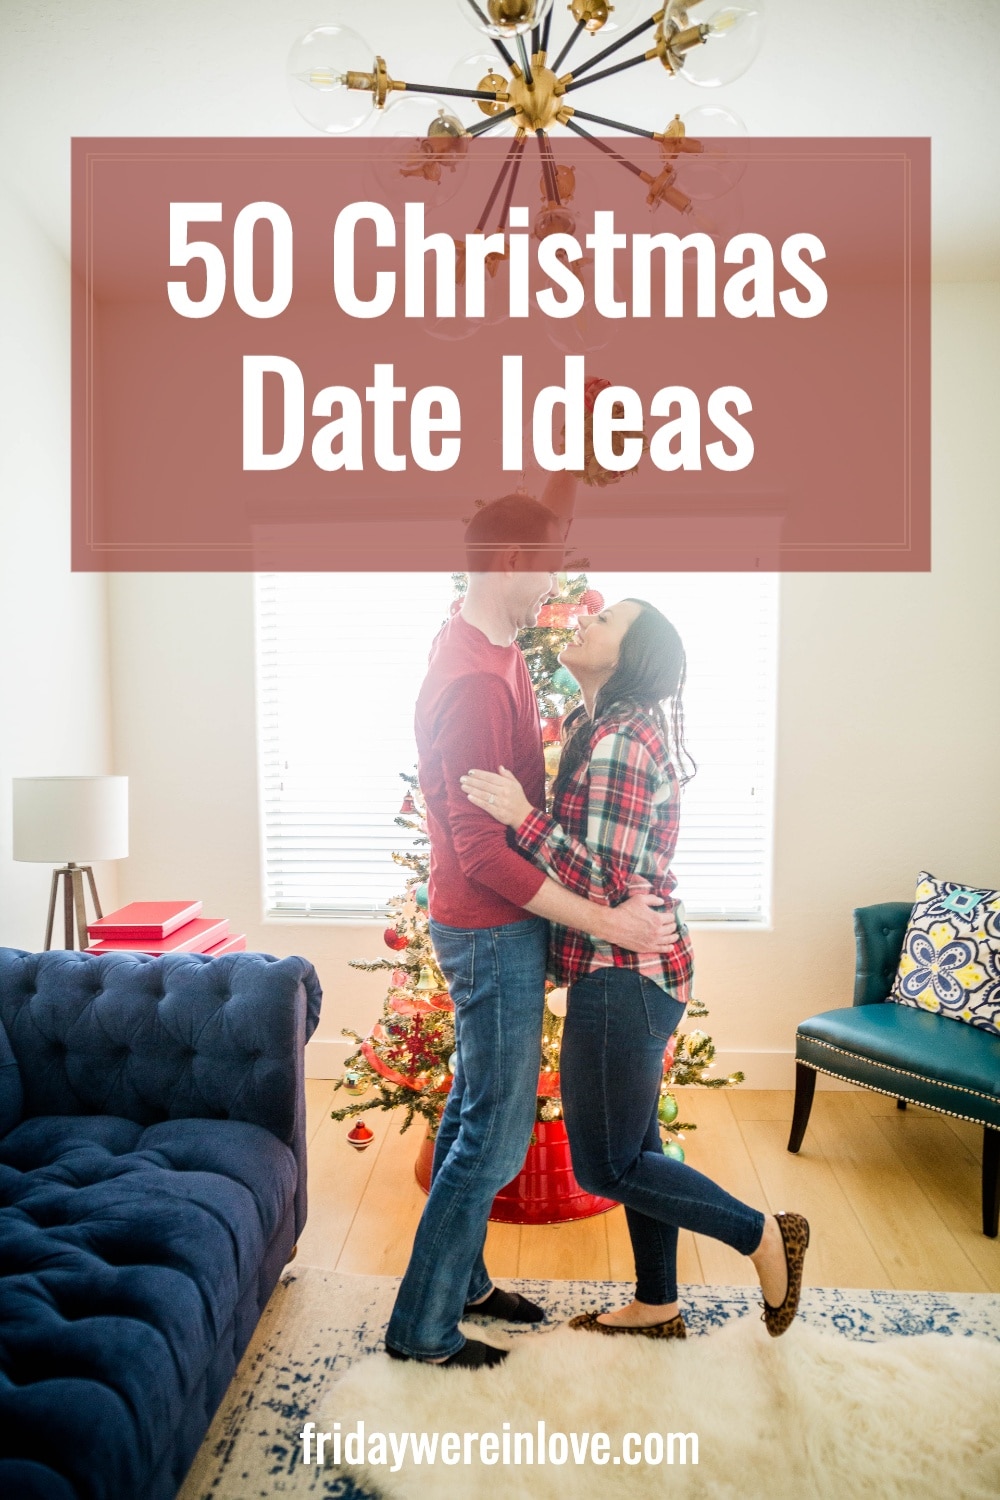 Holiday Date Ideas 50 Christmas Date Ideas for the Holiday Season